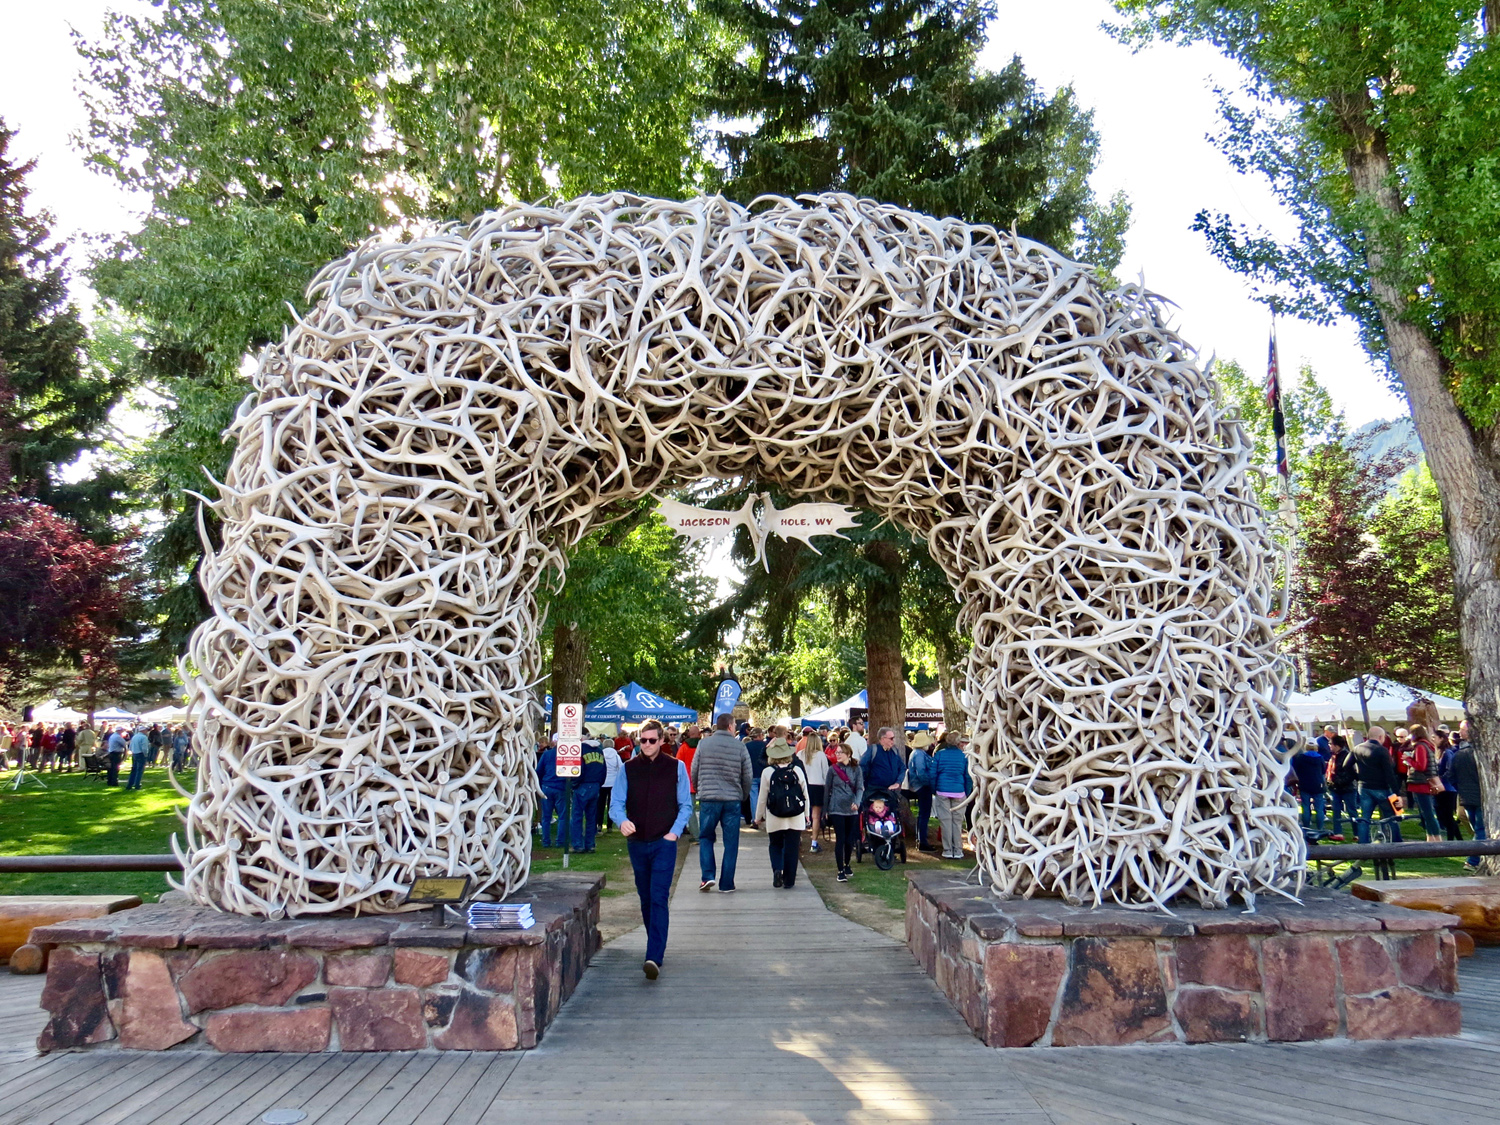 Jackson Hole’s famous Town Square, framed with elk antler arches, is the location of many Fall Arts Festival events in the heart of downtown Jackson, Wyoming.